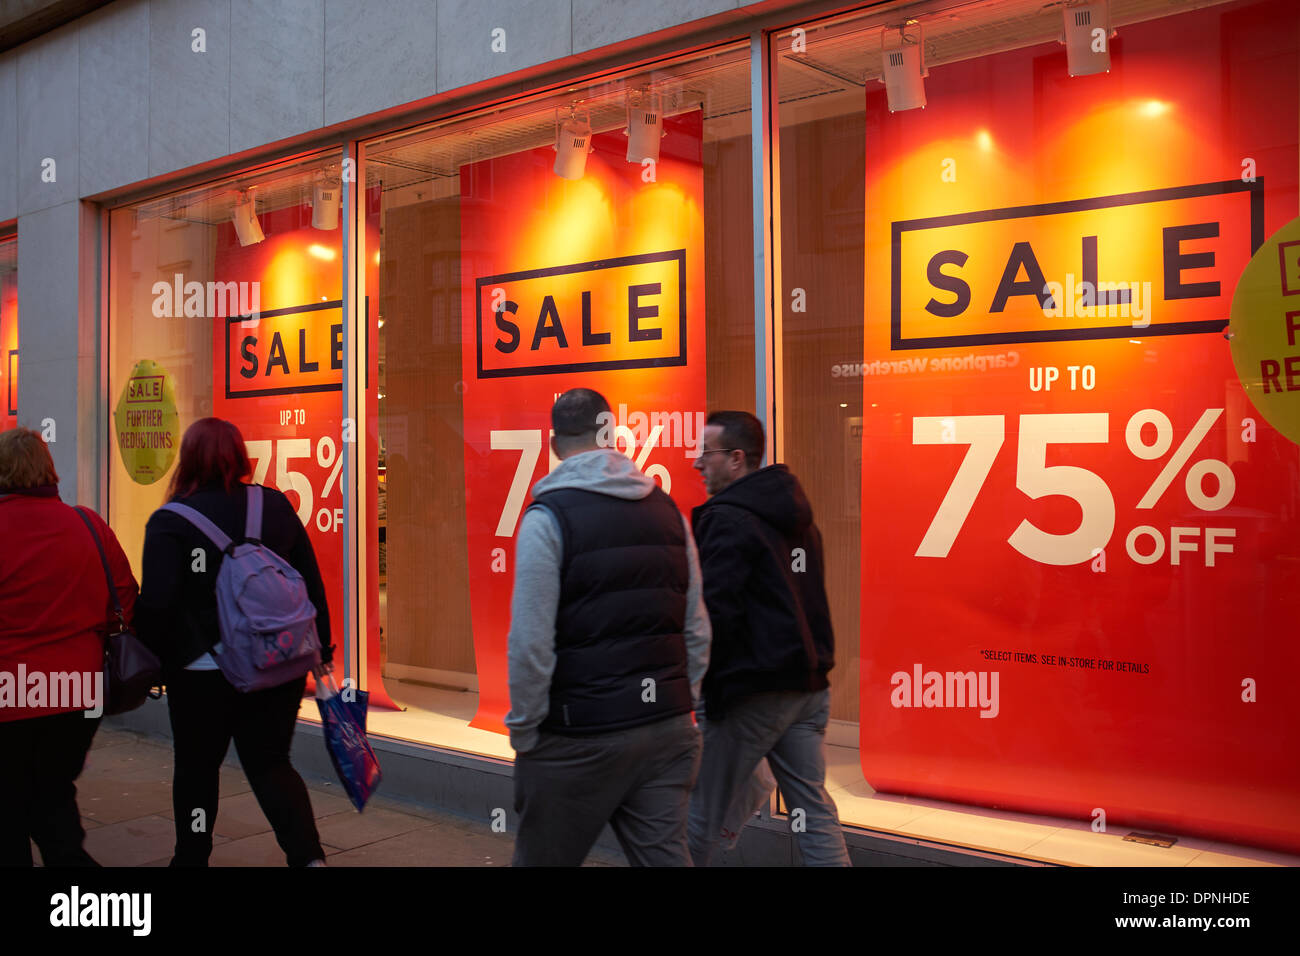 Shoppers walking past the sale banners in a shop window Stock Photo